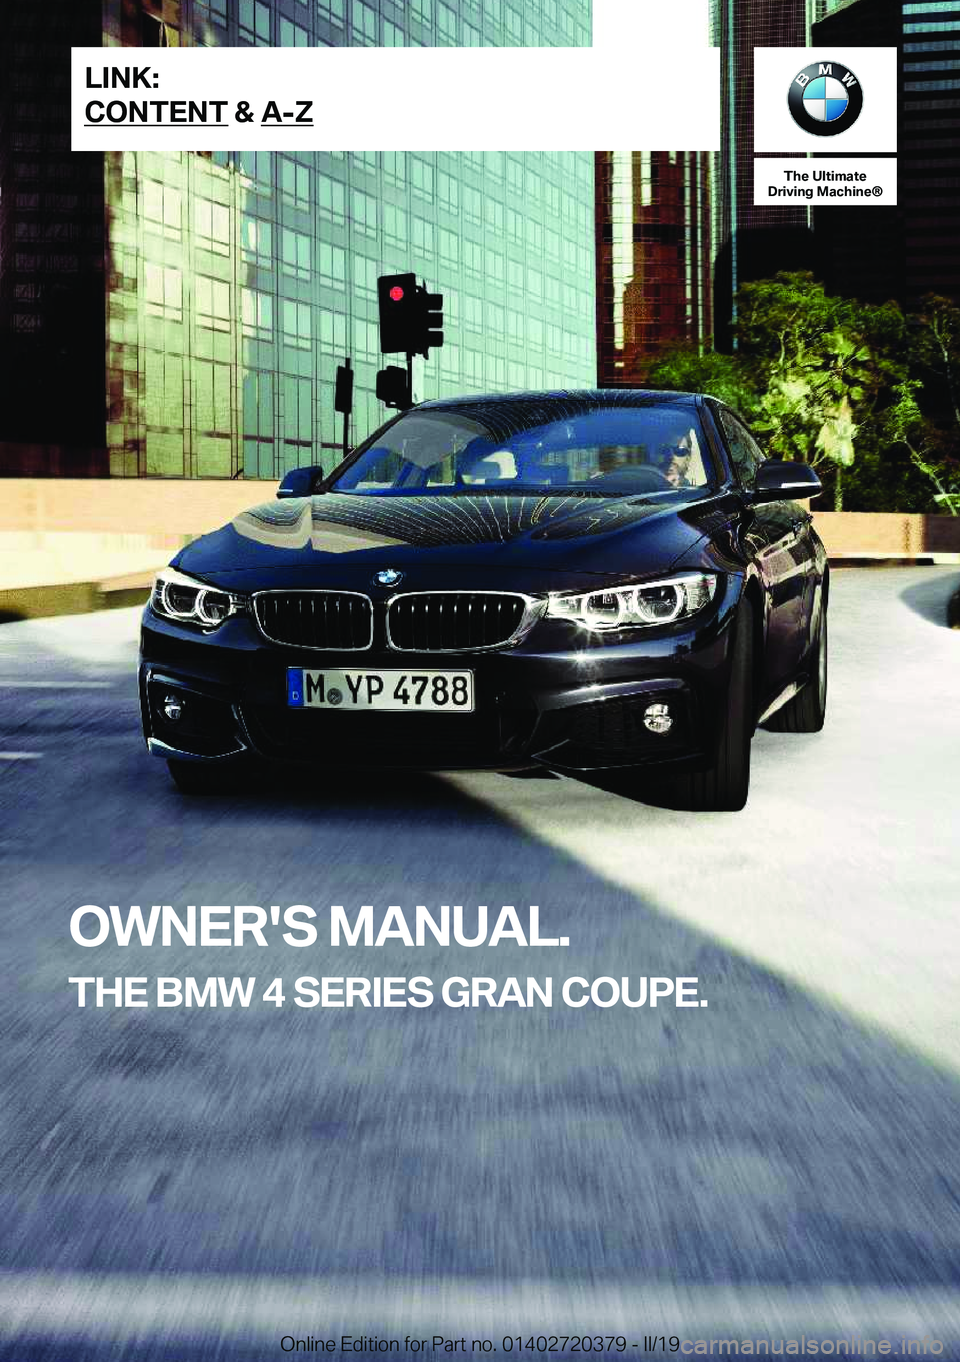 BMW 4 SERIES COUPE 2020  Owners Manual �T�h�e��U�l�t�i�m�a�t�e
�D�r�i�v�i�n�g��M�a�c�h�i�n�e�n
�O�W�N�E�R�'�S��M�A�N�U�A�L�.
�T�H�E��B�M�W��4��S�E�R�I�E�S��G�R�A�N��C�O�U�P�E�.�L�I�N�K�:
�C�O�N�T�E�N�T��&��A�-�Z�O�n�l�i�n�e�